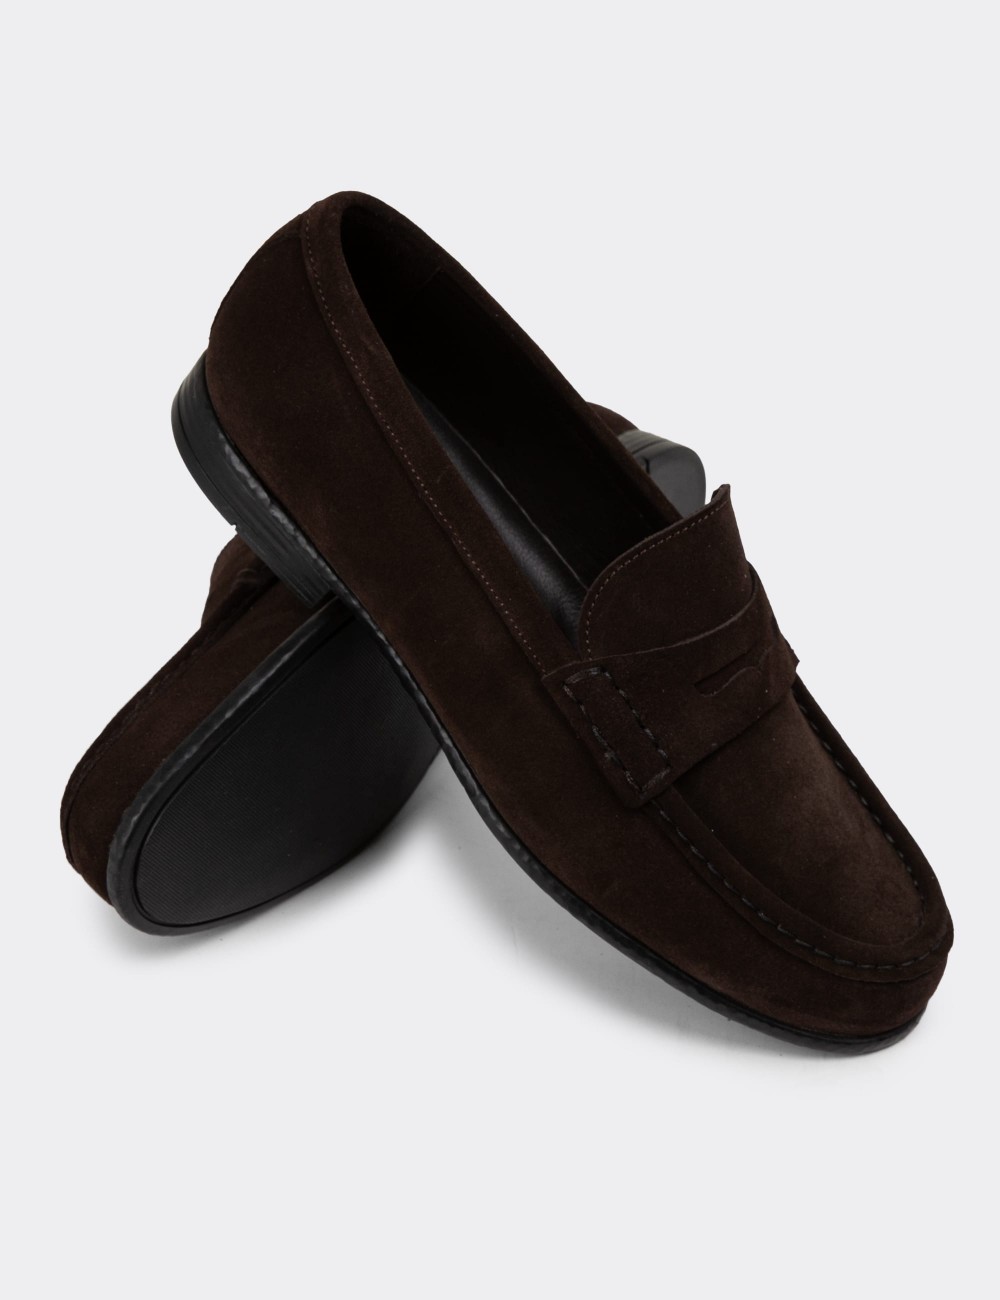 Brown Suede Leather Loafers - 01510MKHVC02